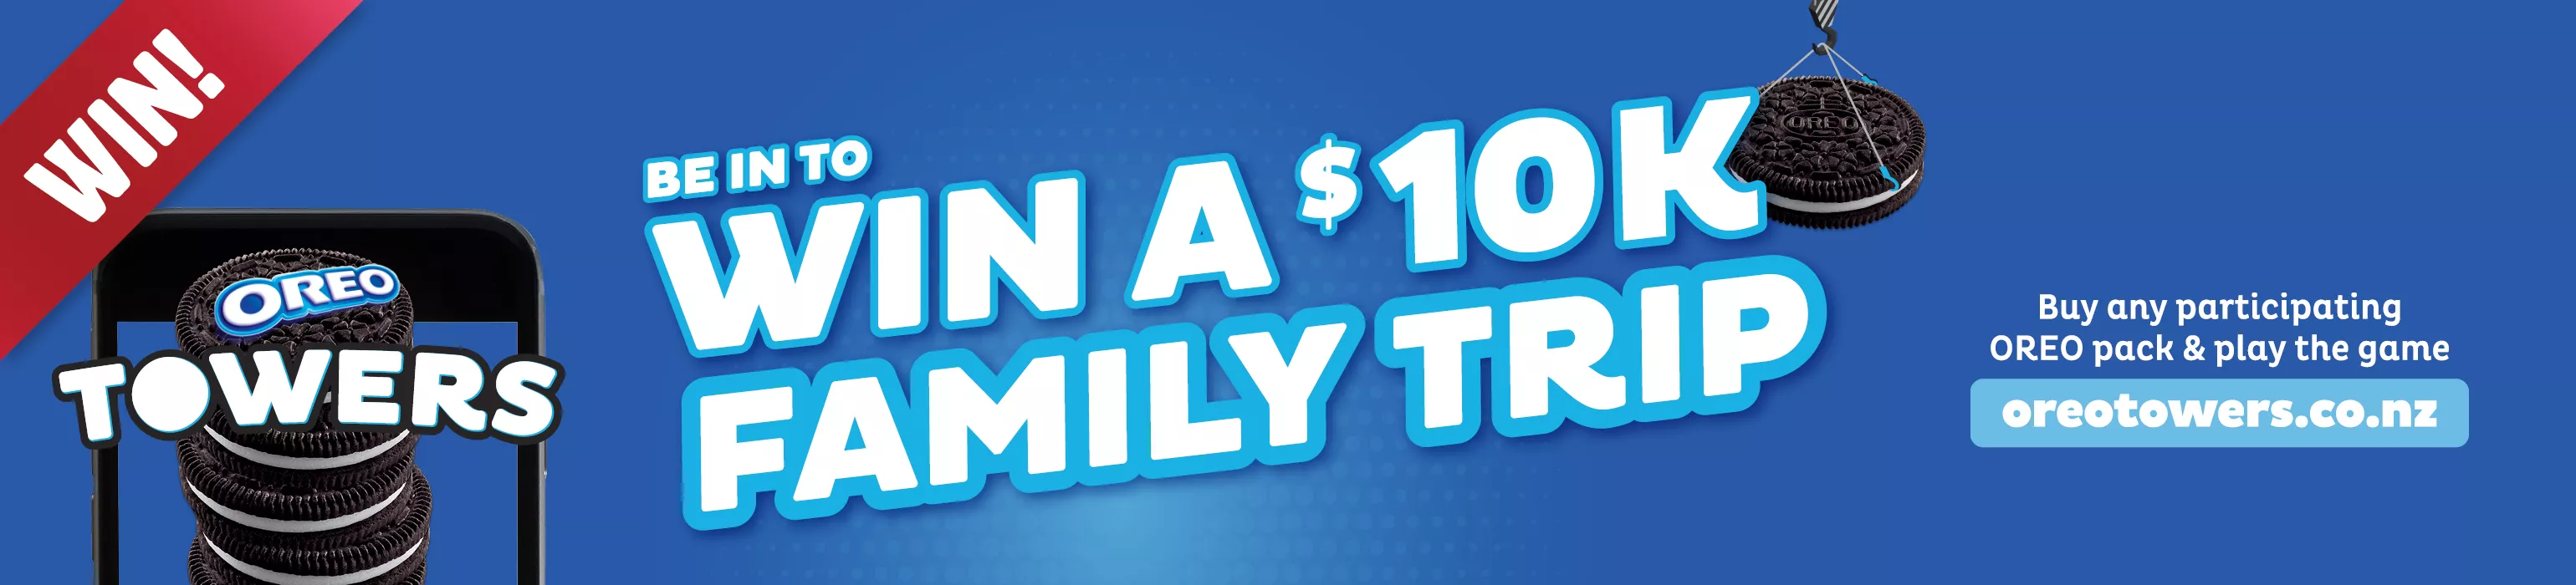 Win a family trip with Oreo